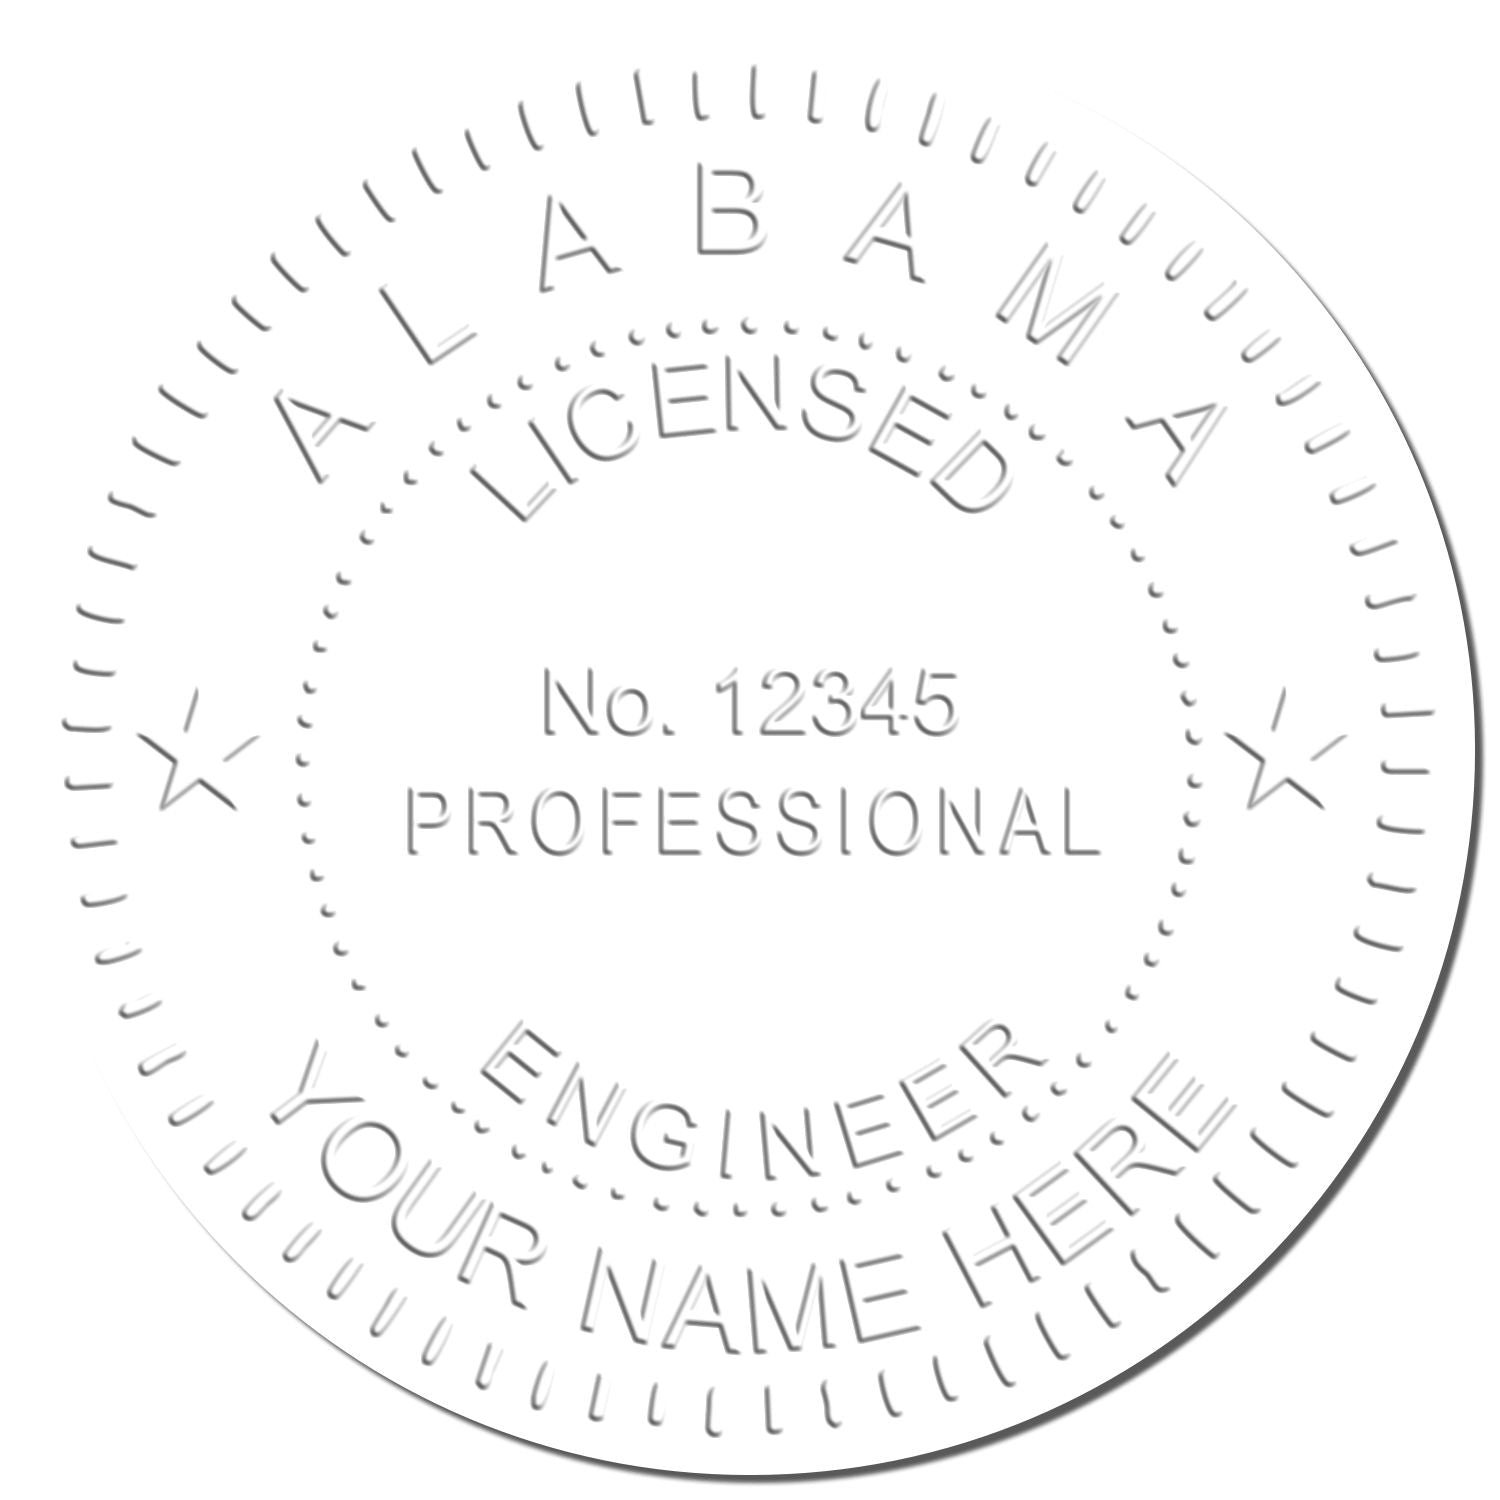 The main image for the Alabama Engineer Desk Seal depicting a sample of the imprint and electronic files